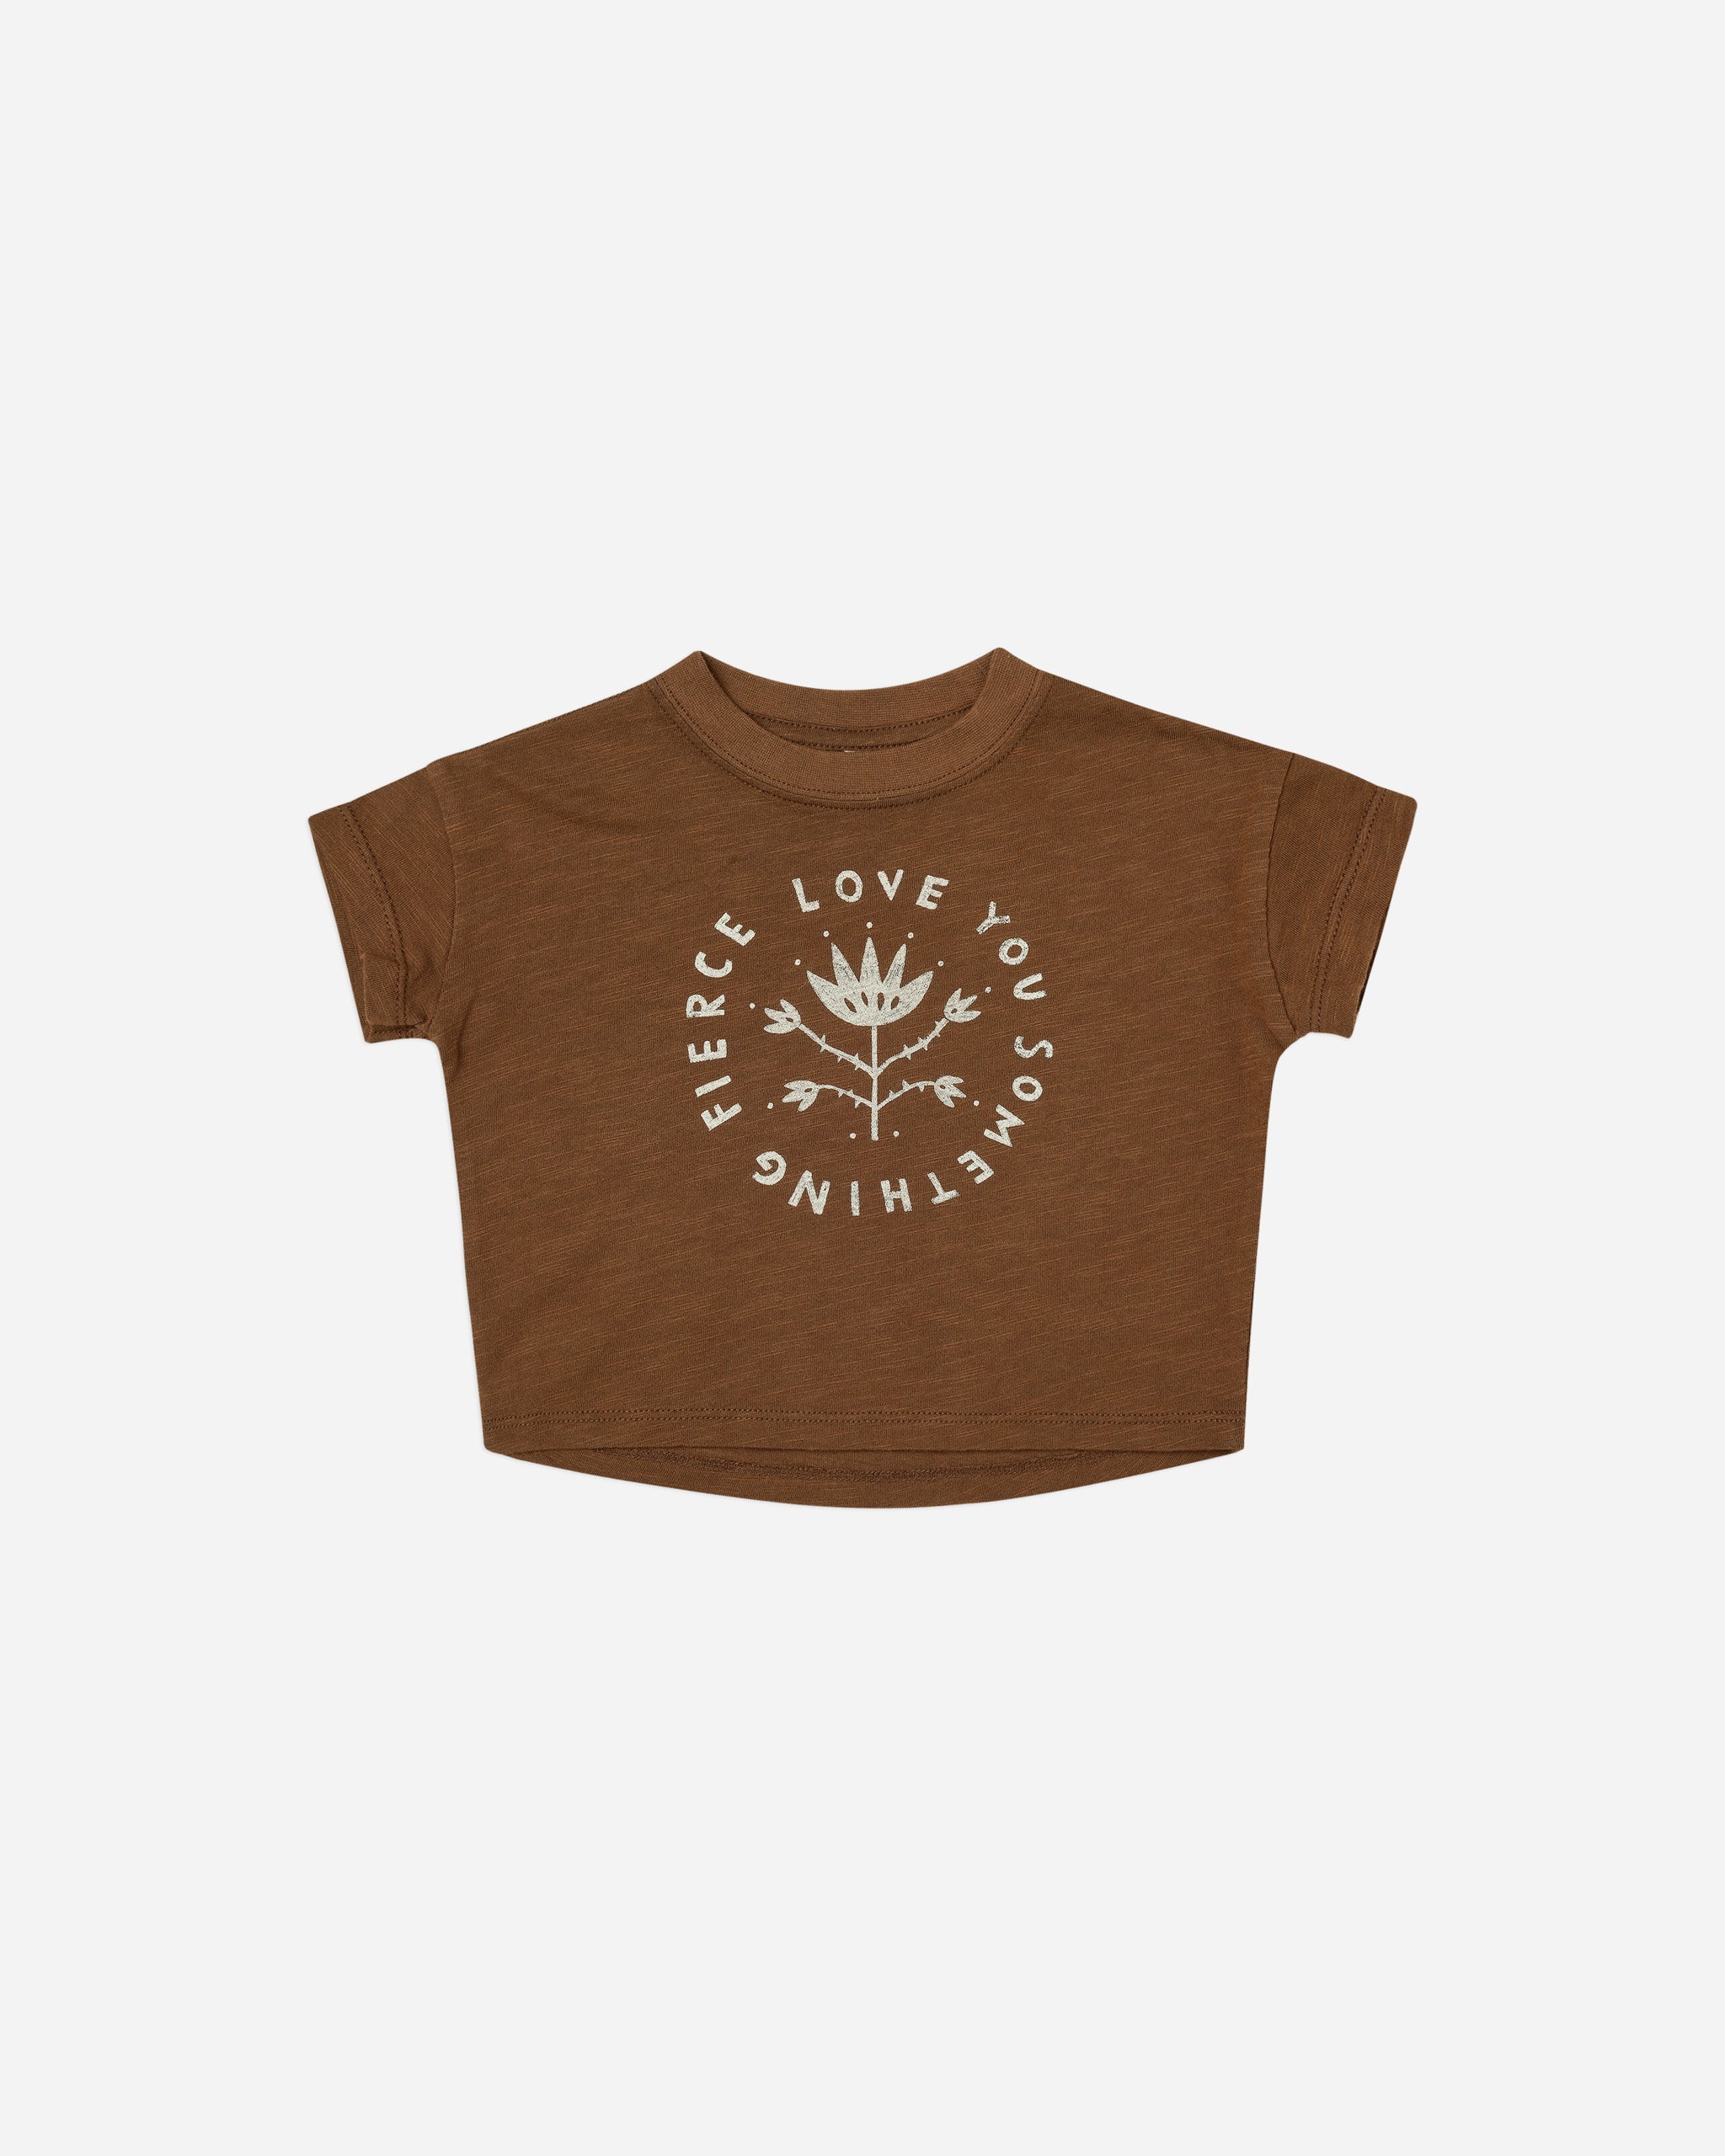 boxy tee || love you - Rylee + Cru | Kids Clothes | Trendy Baby Clothes | Modern Infant Outfits |